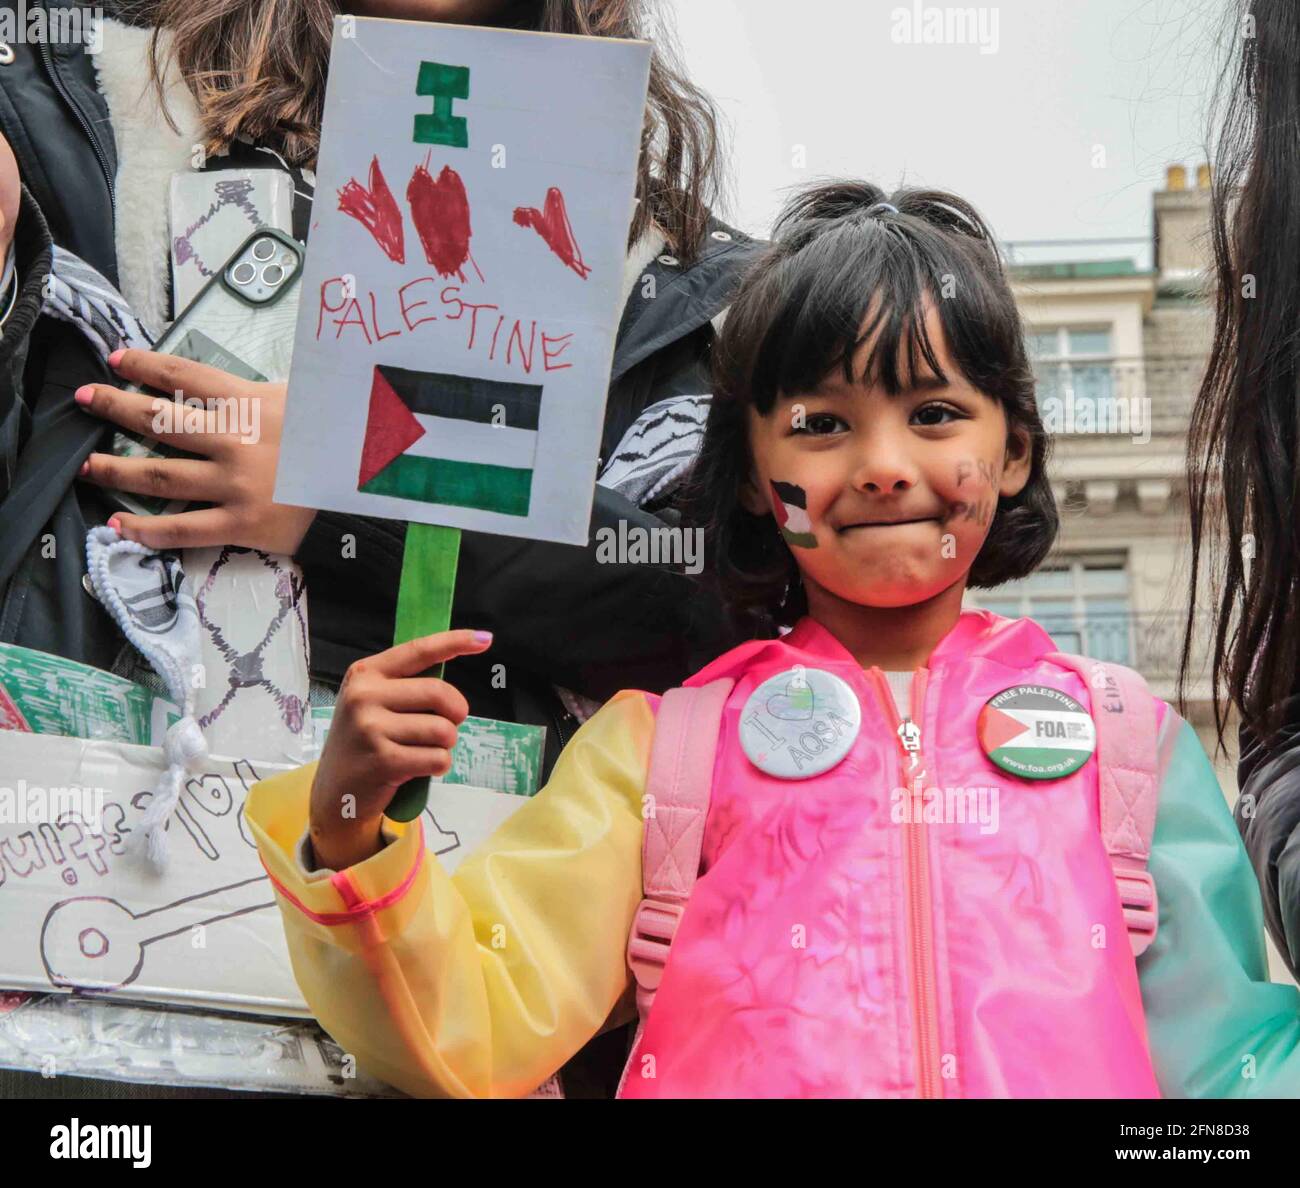 London 15 May 2021  On the day Palestinians celebrate Nakba Day ,they gathered in Marble Arch to march to the Israeli Embassy to protest at the lates violence in Israel.Paul Quezada-Neiman/Alamy Live News Stock Photo